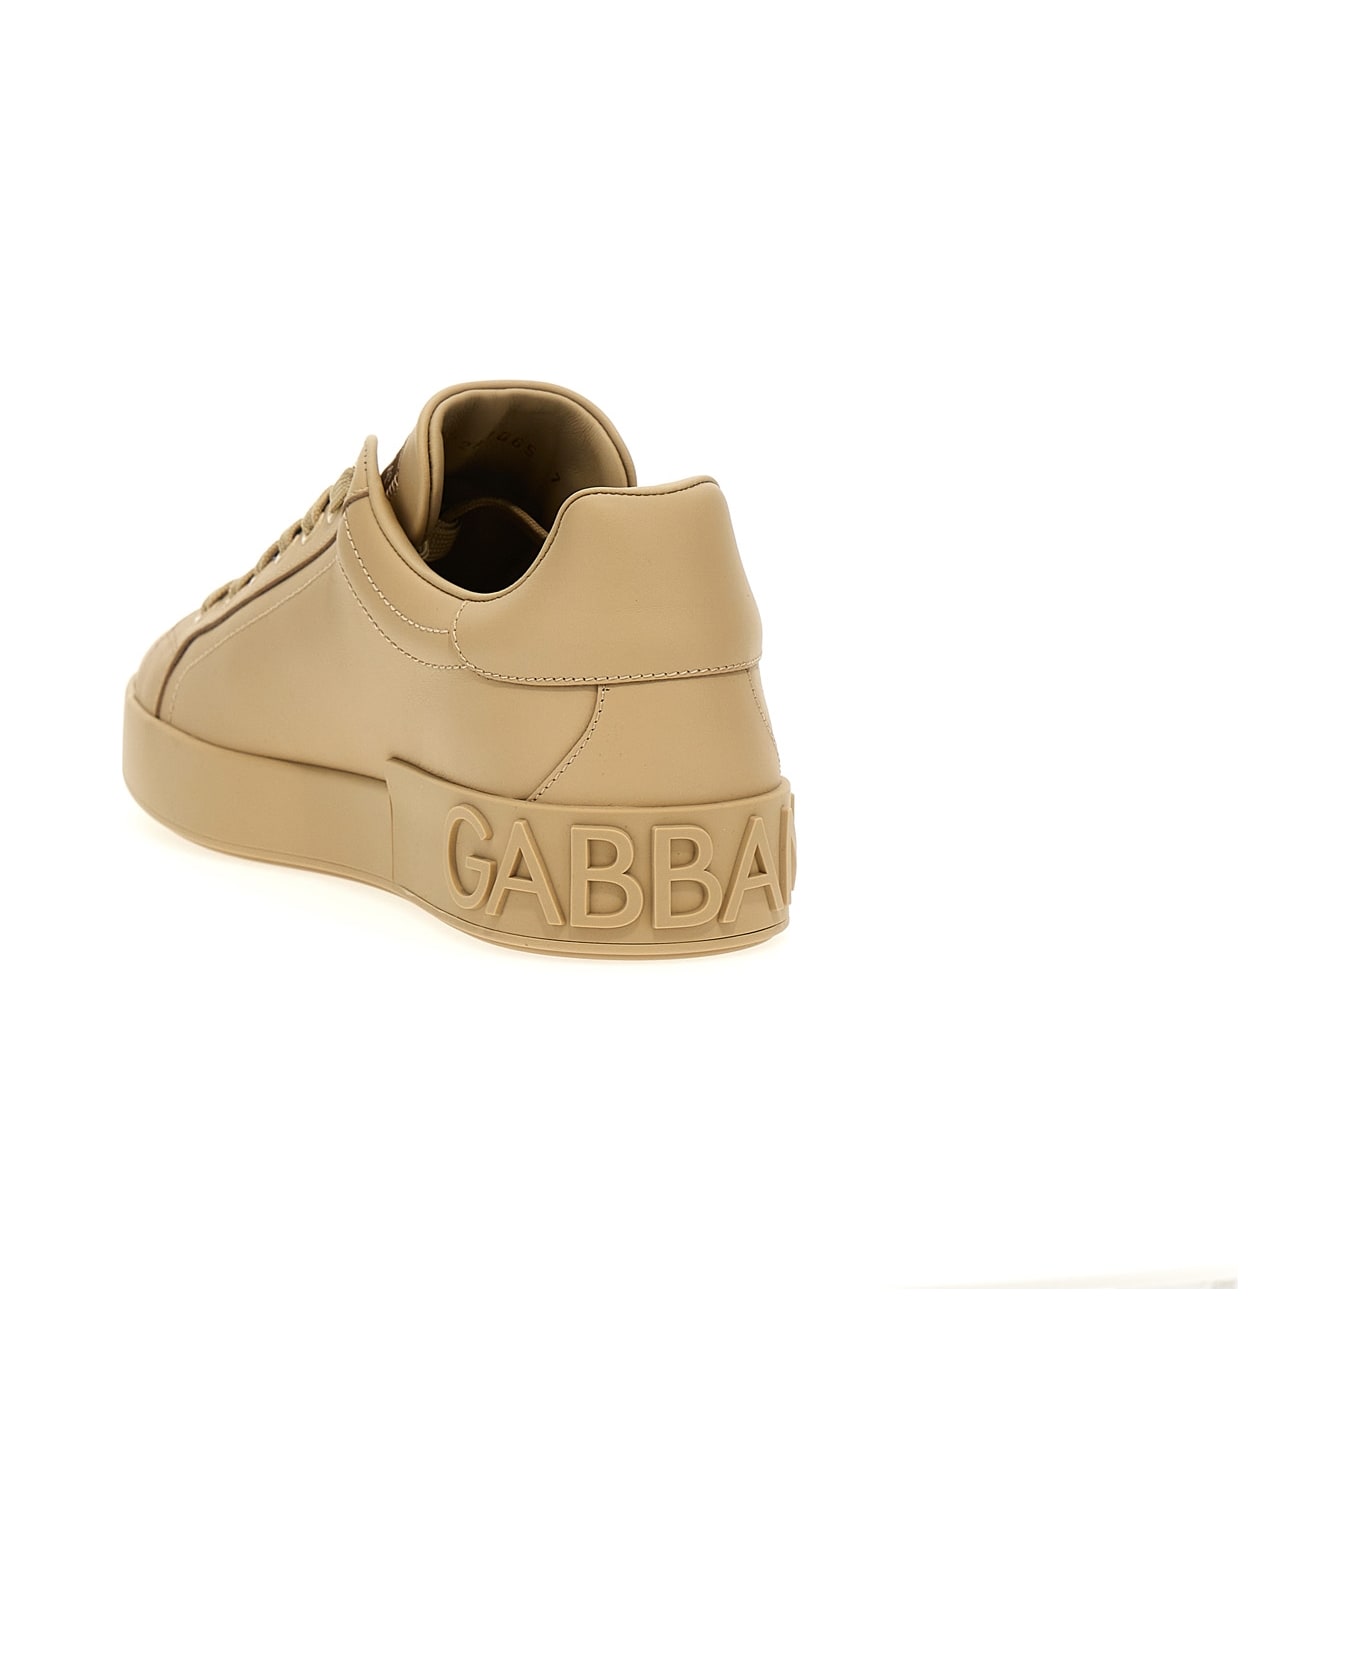 Dolce & Gabbana Portofino Leather Lace-up Sneakers - Beige スニーカー